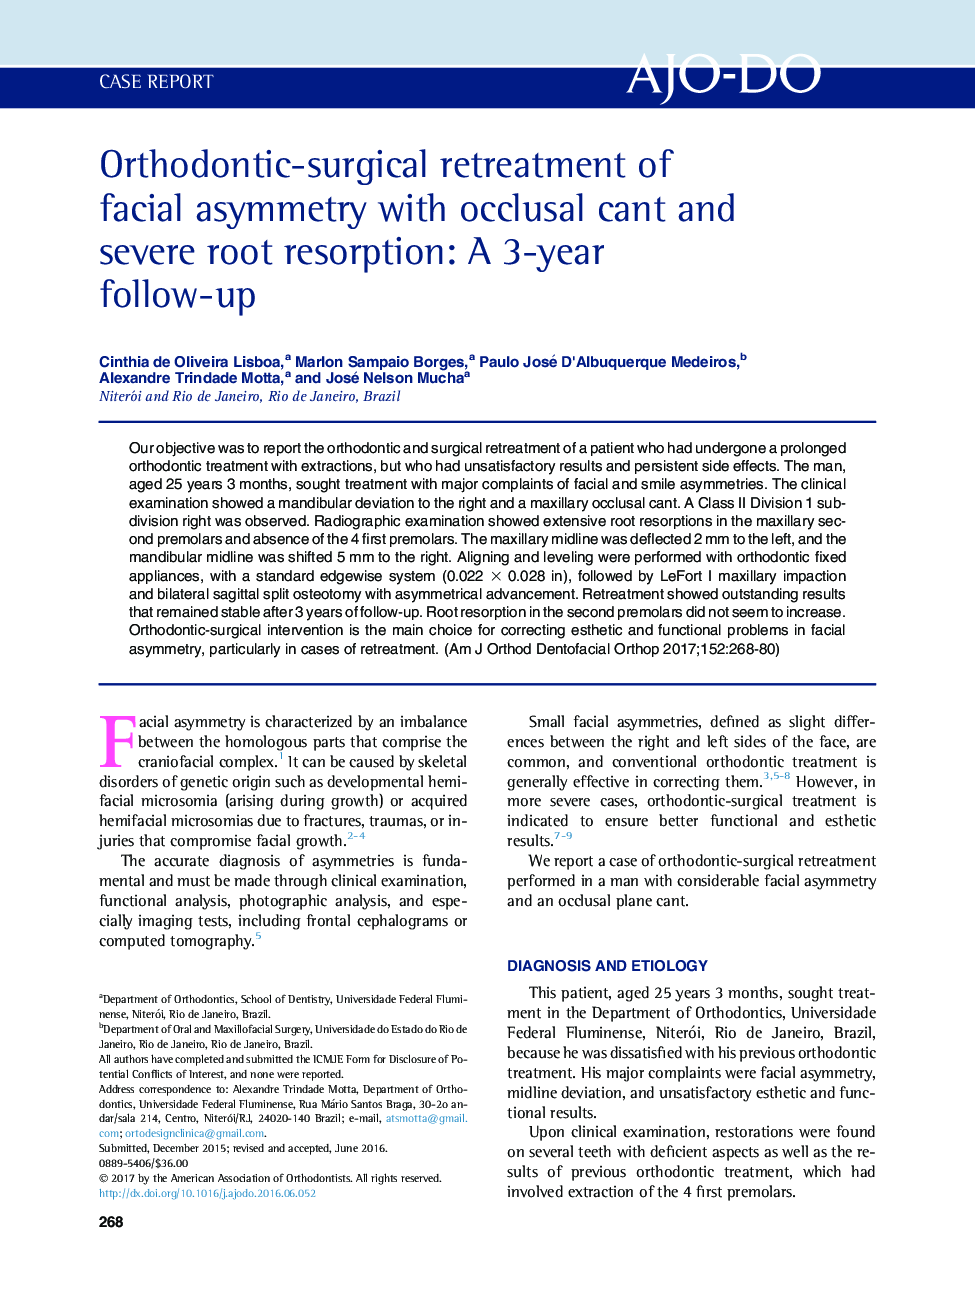 Orthodontic-surgical retreatment of facial asymmetry with occlusal cant and severe root resorption: A 3-year follow-up